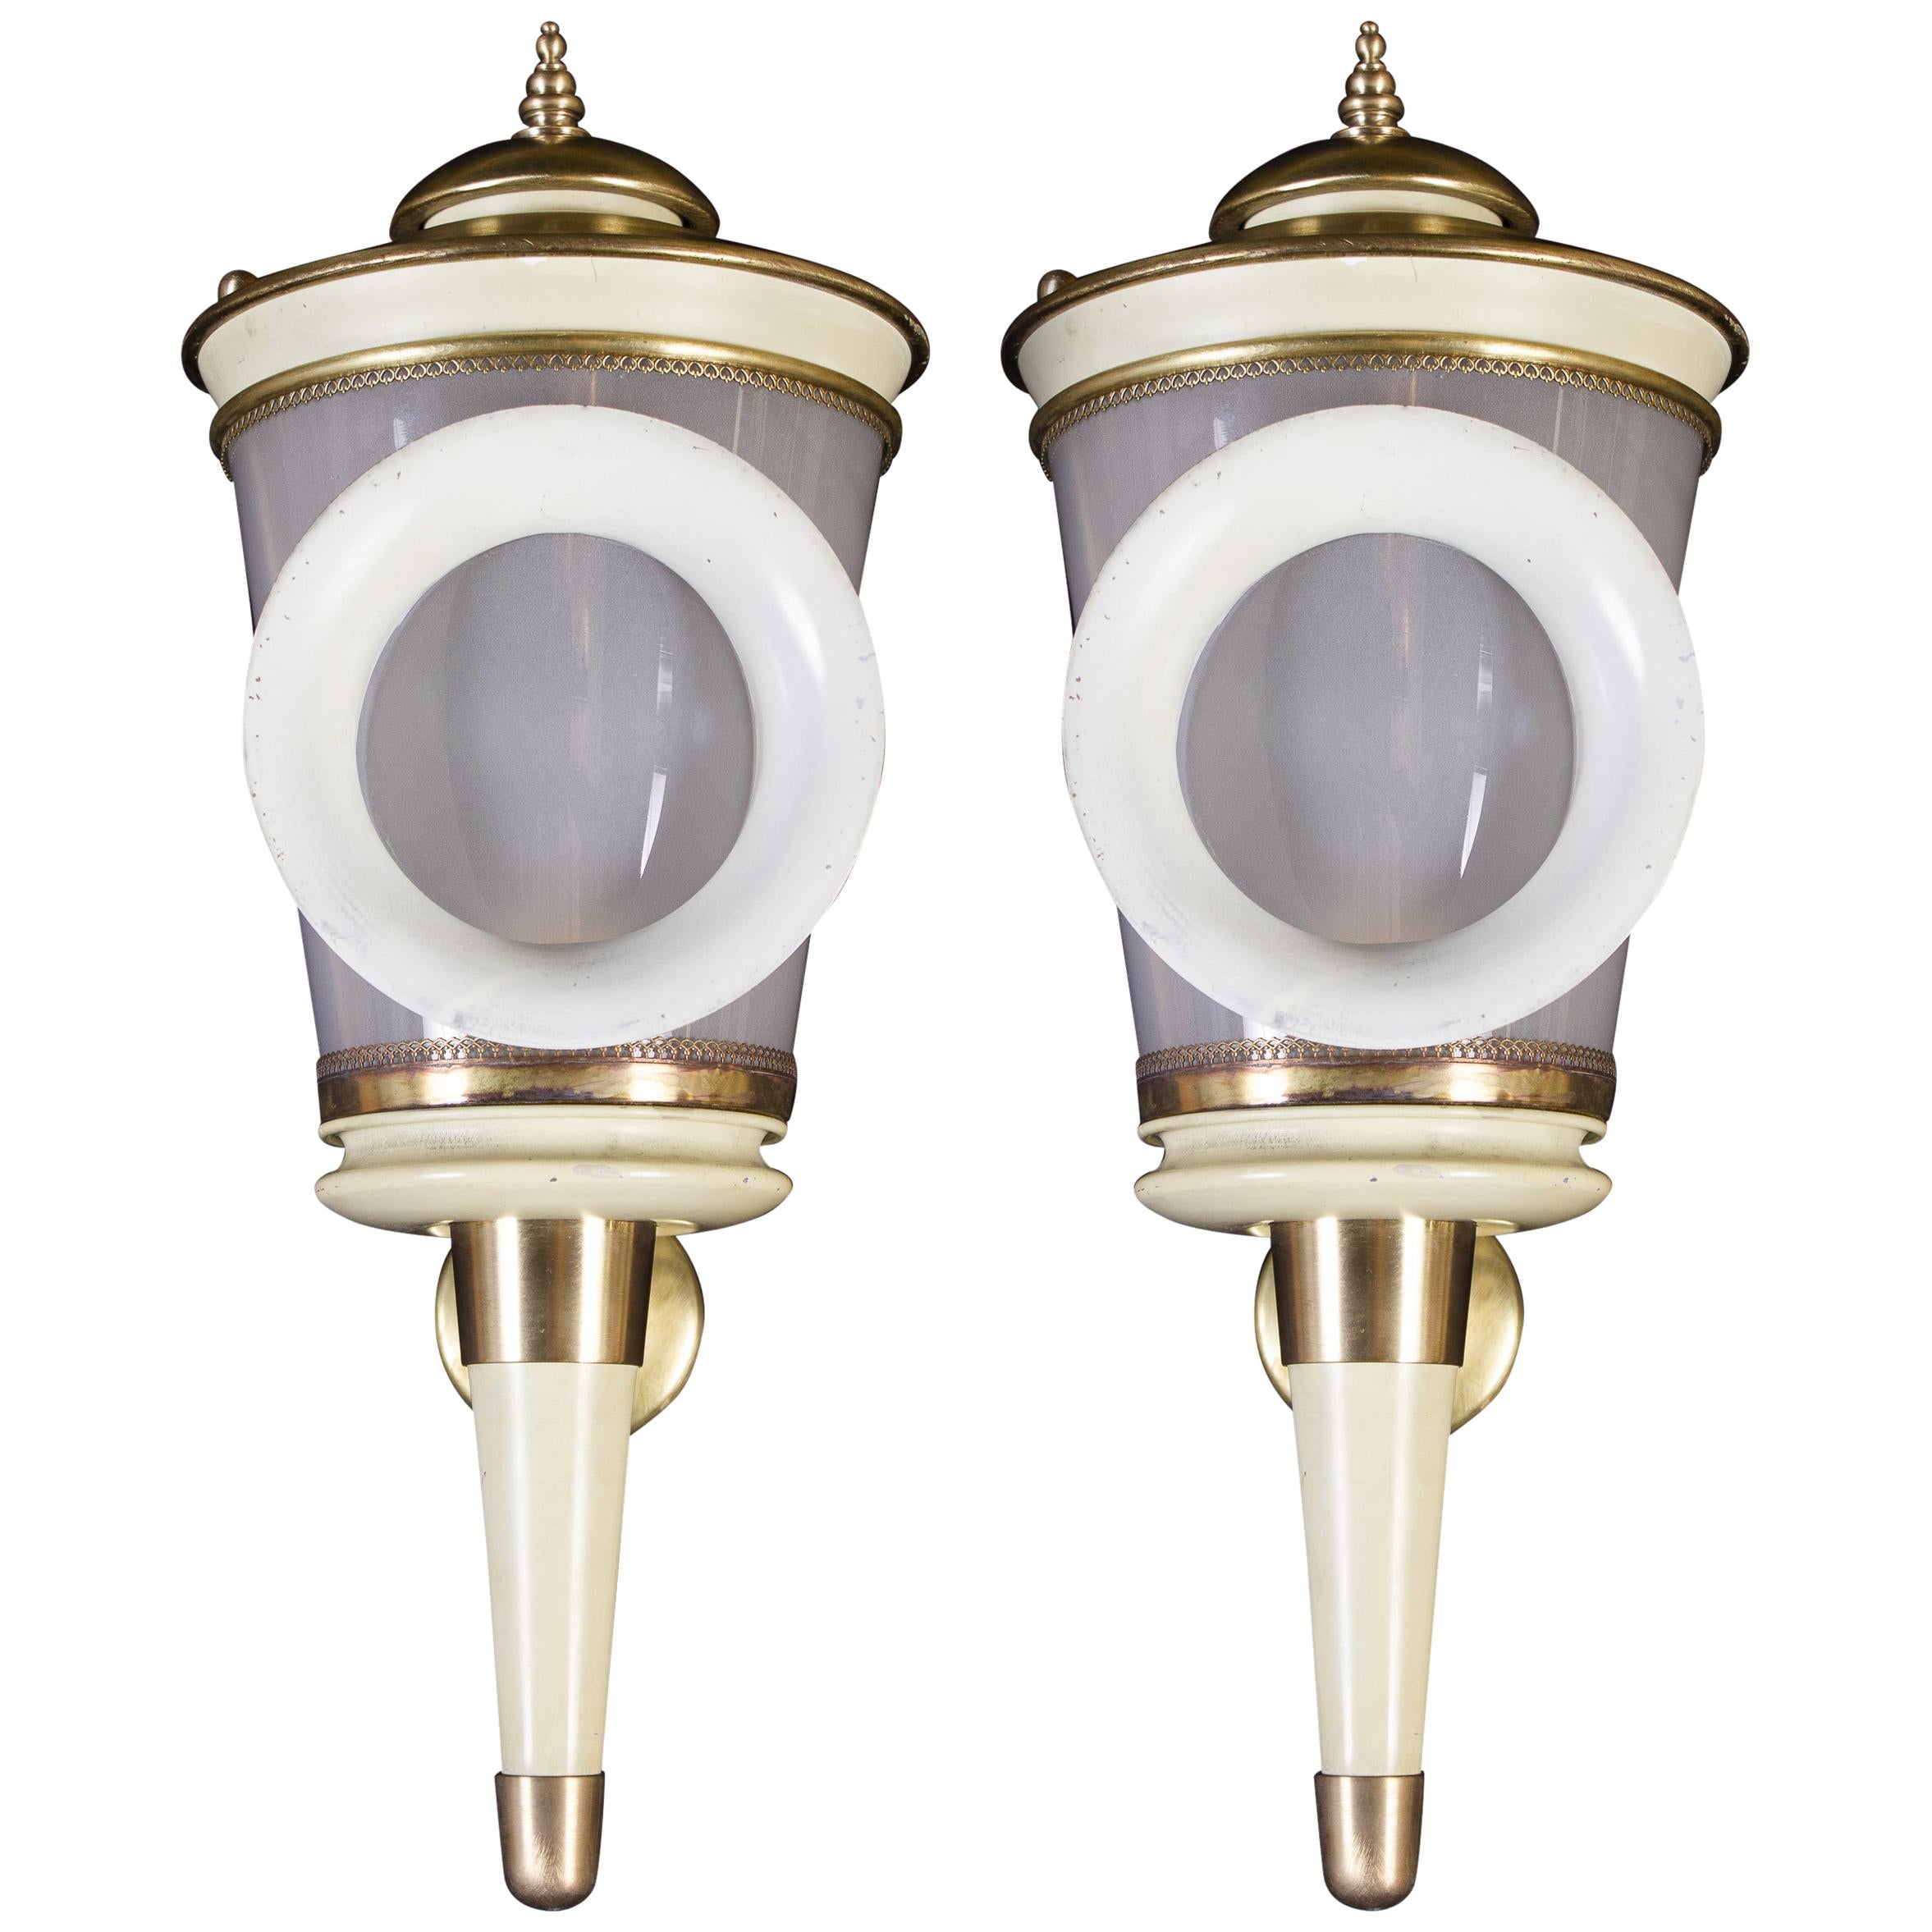 Pair of Ivory Painted and Brass Sconces or Wall Lights Carlo Scarpa Style, 1940 For Sale